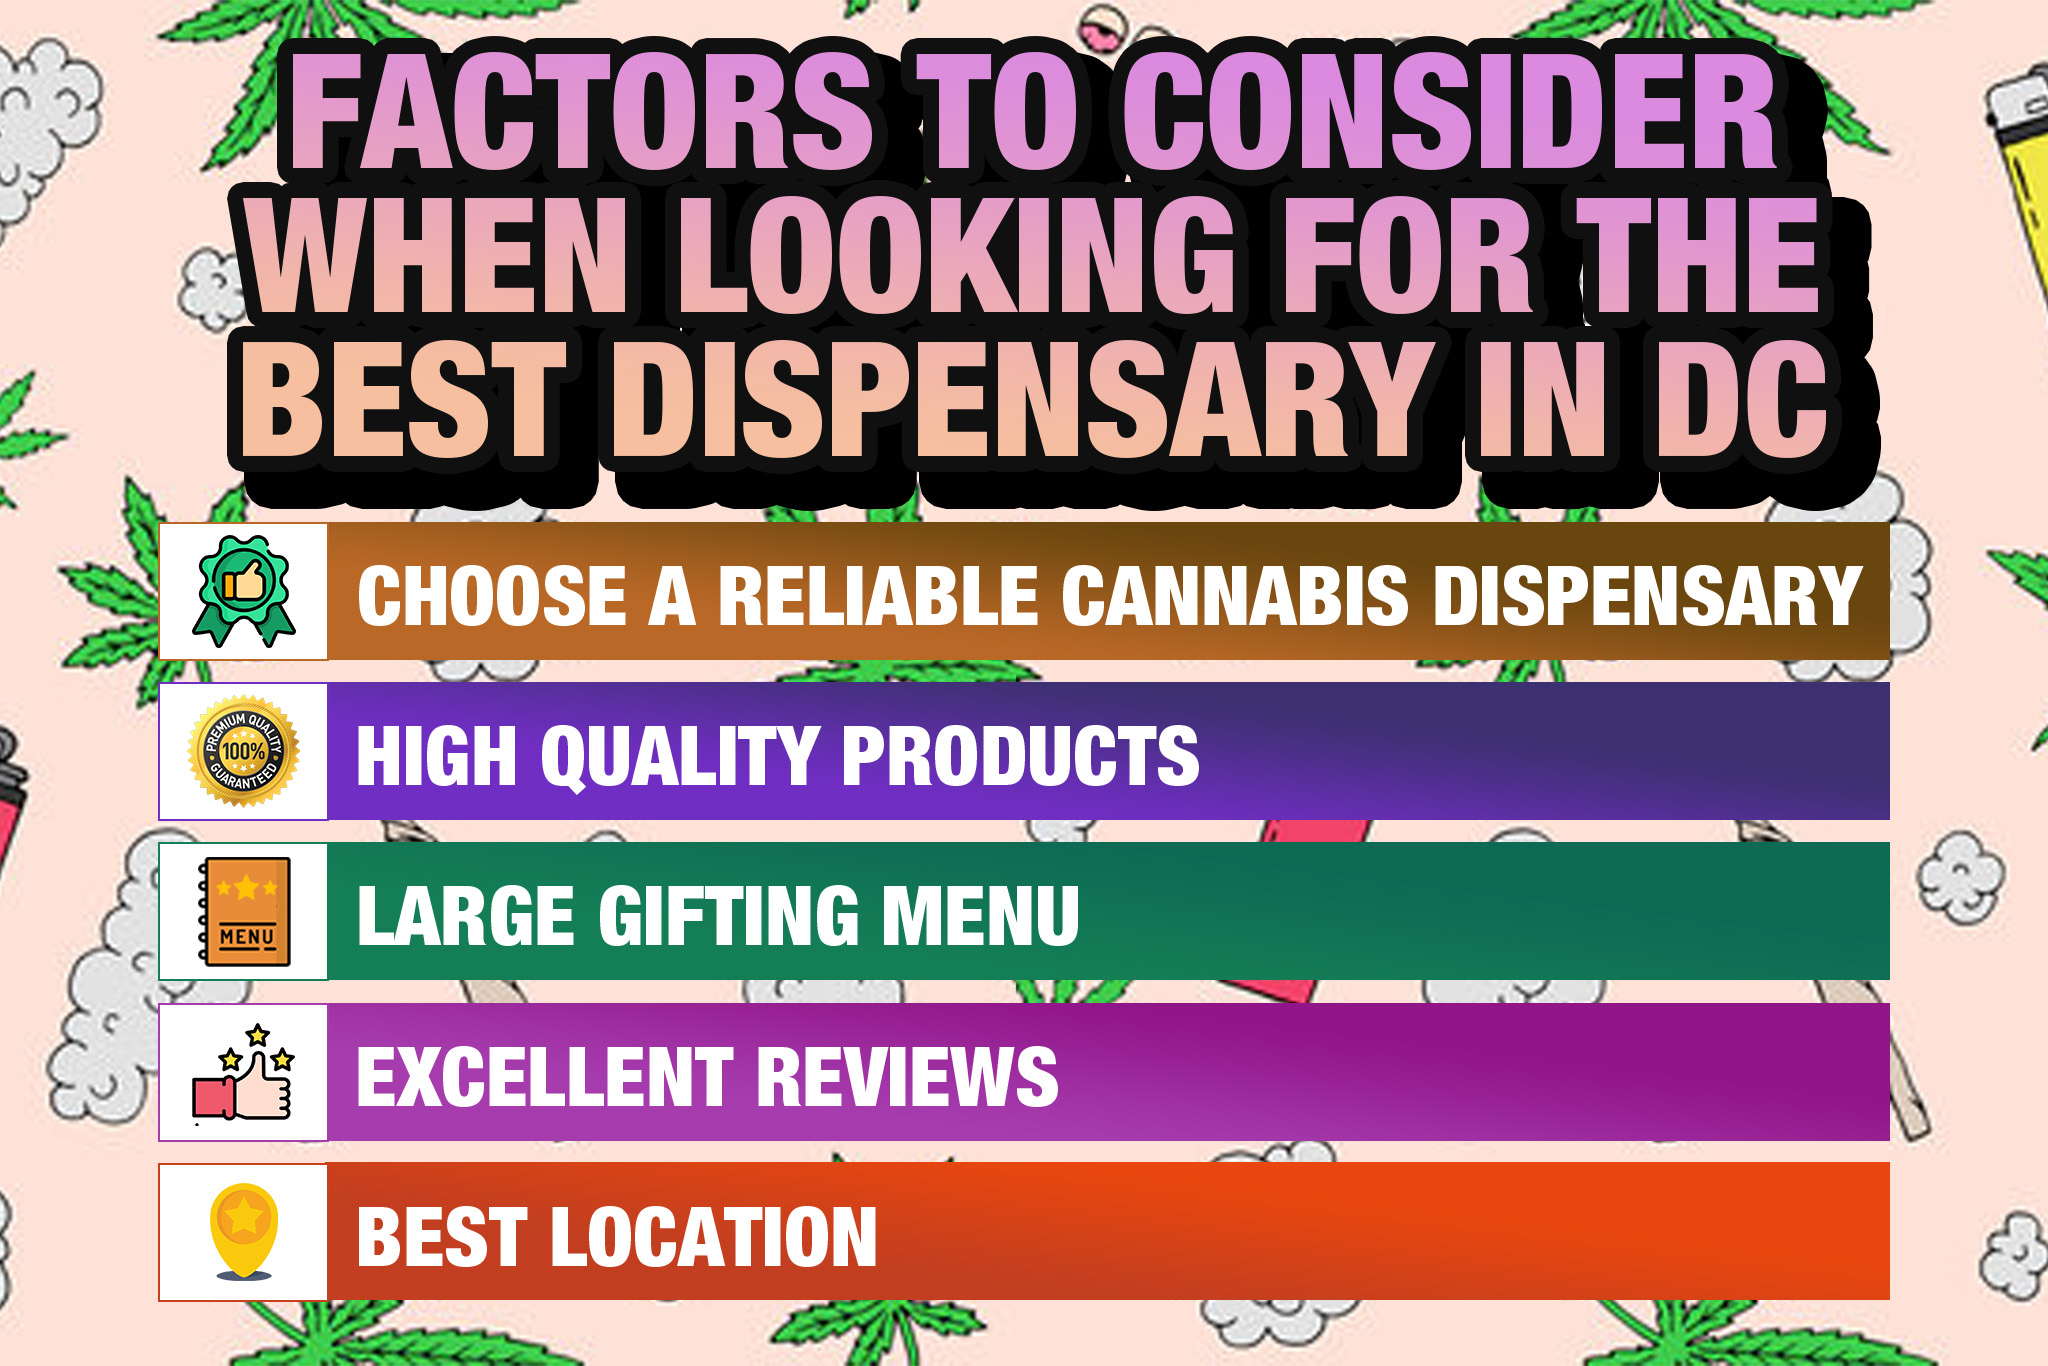 Factors To Consider When Looking For The Best Dispensary In DC